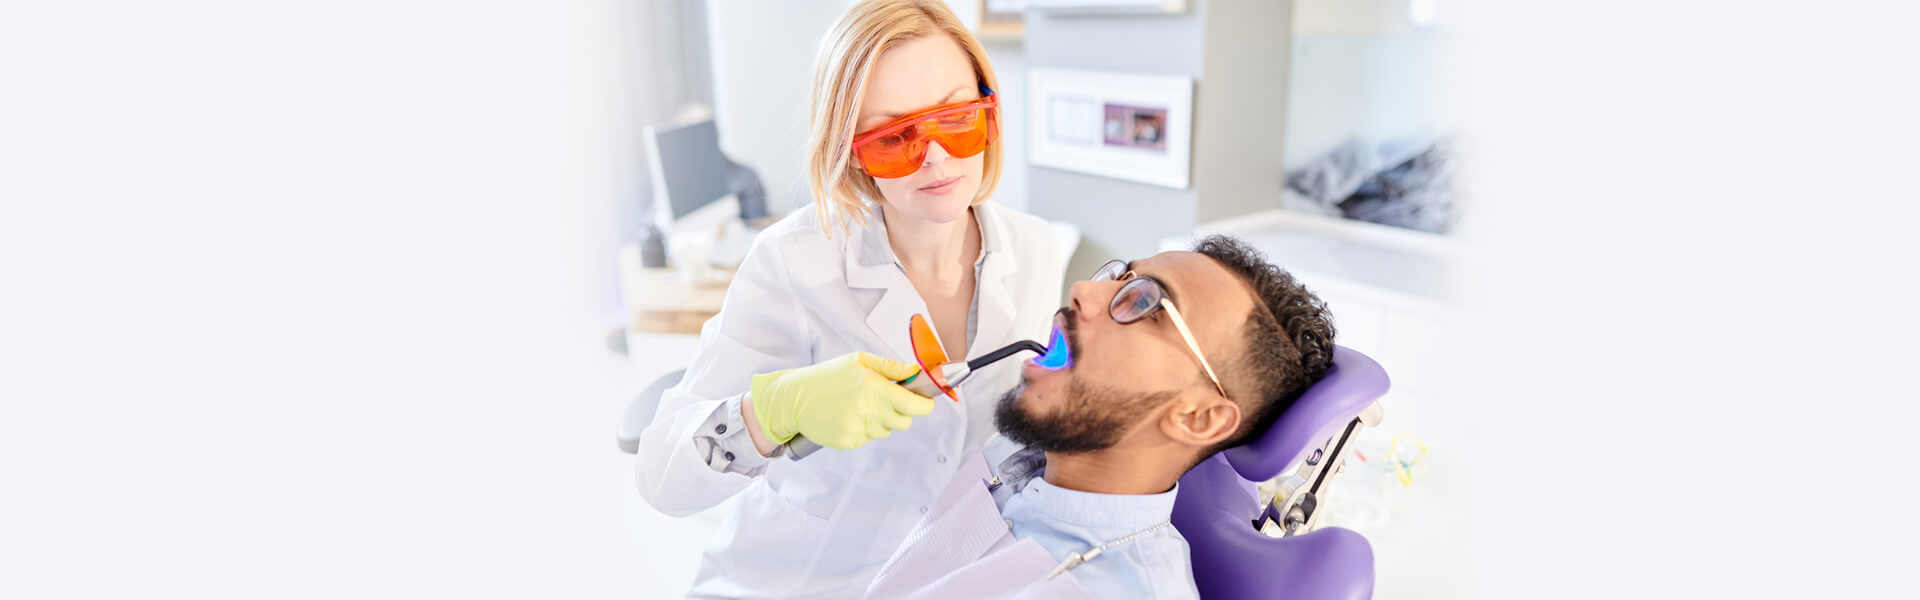 What is Laser Treatment in Dentistry?